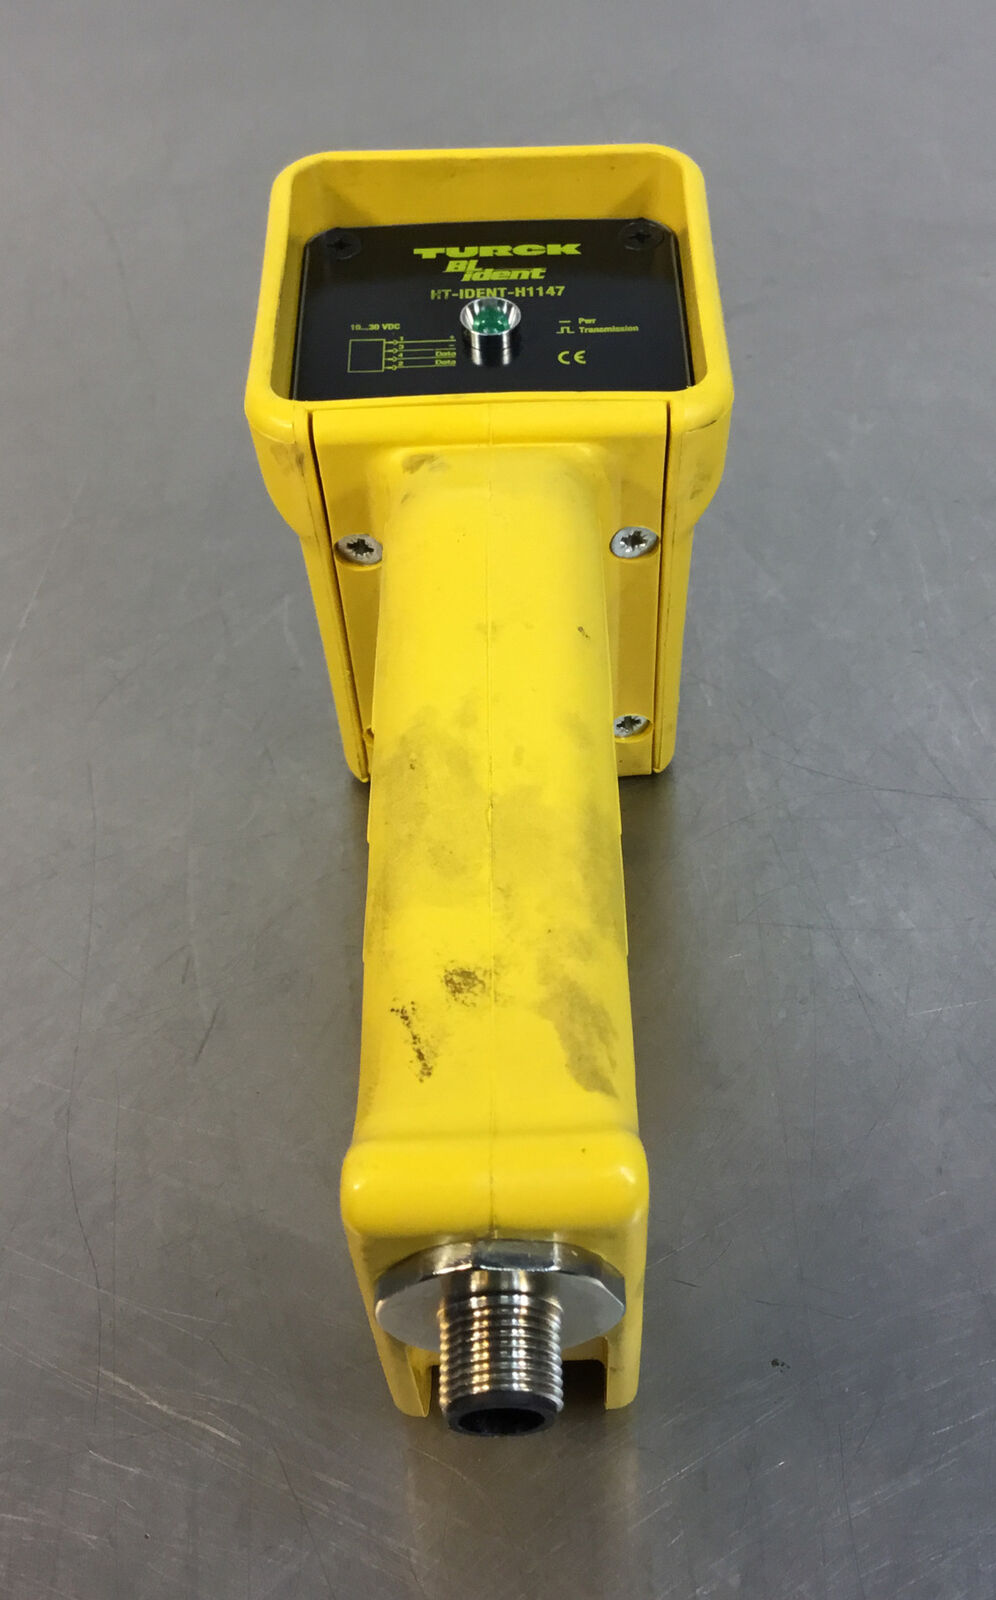 Turck - HT-IDENT-H1147 Handheld Read/Write Head w/ RK4.4T-2-RS4.4T Cable      5D